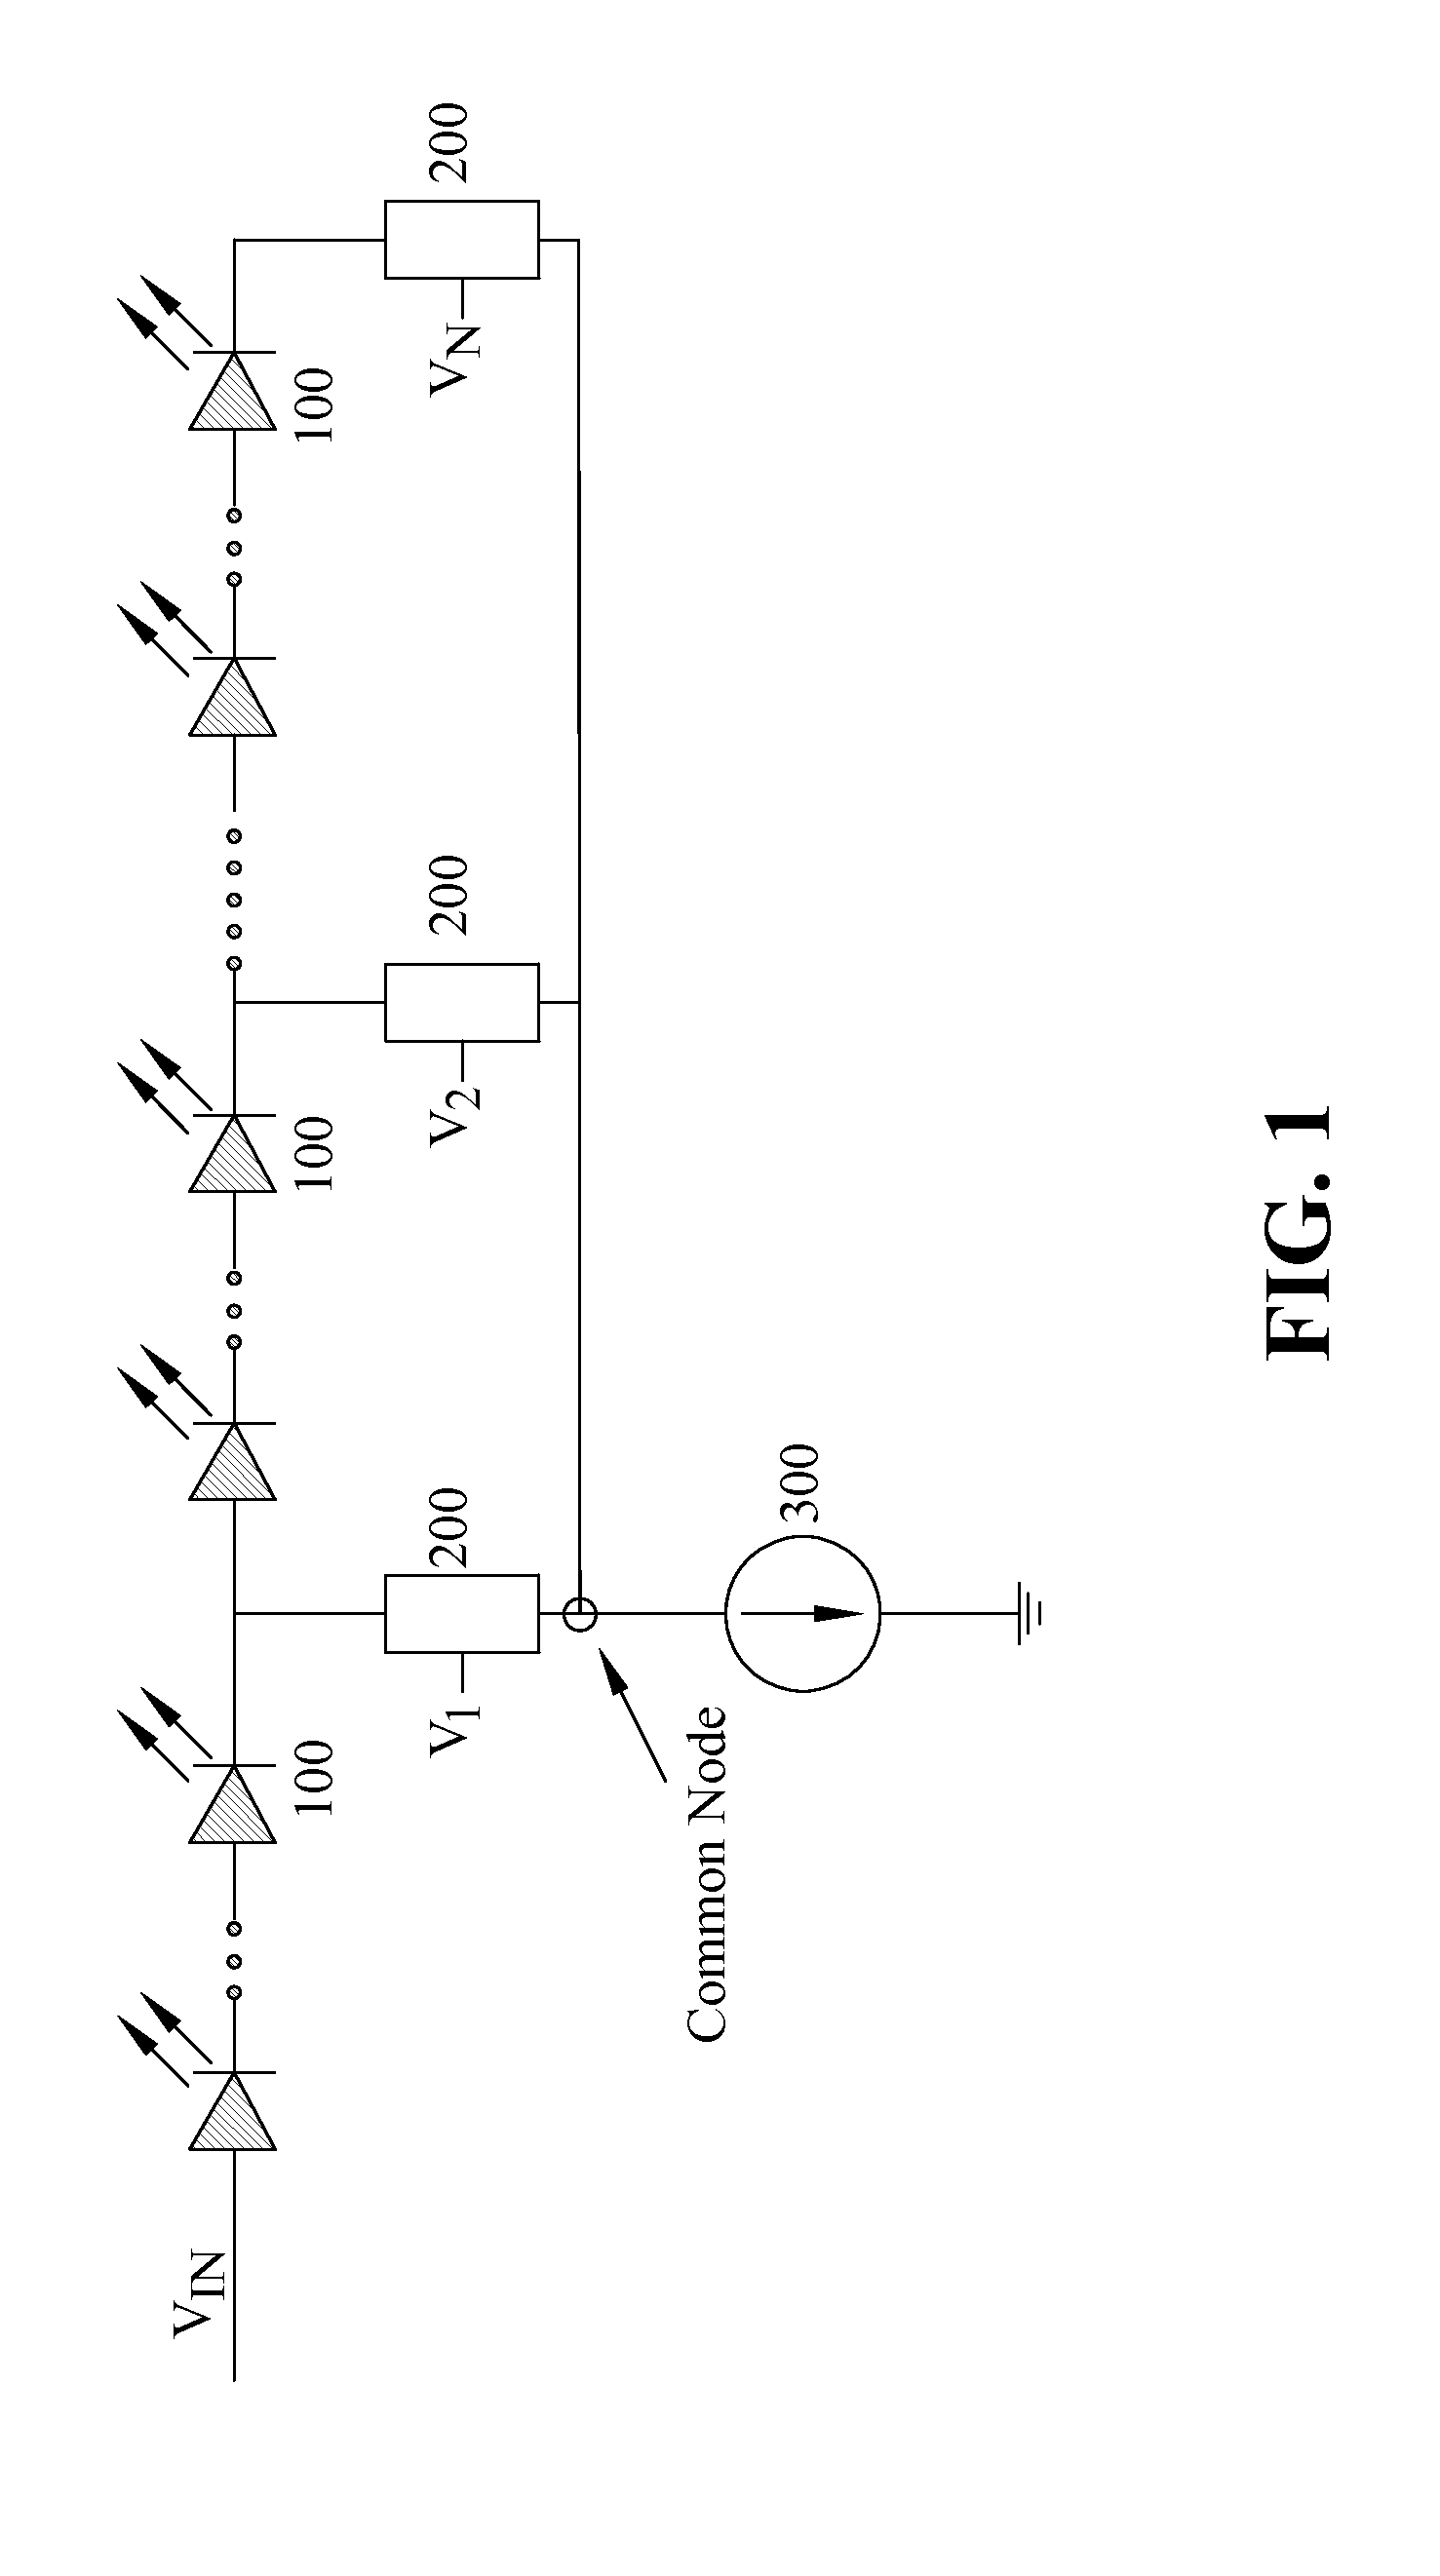 Apparatus for driving LEDs using high voltage